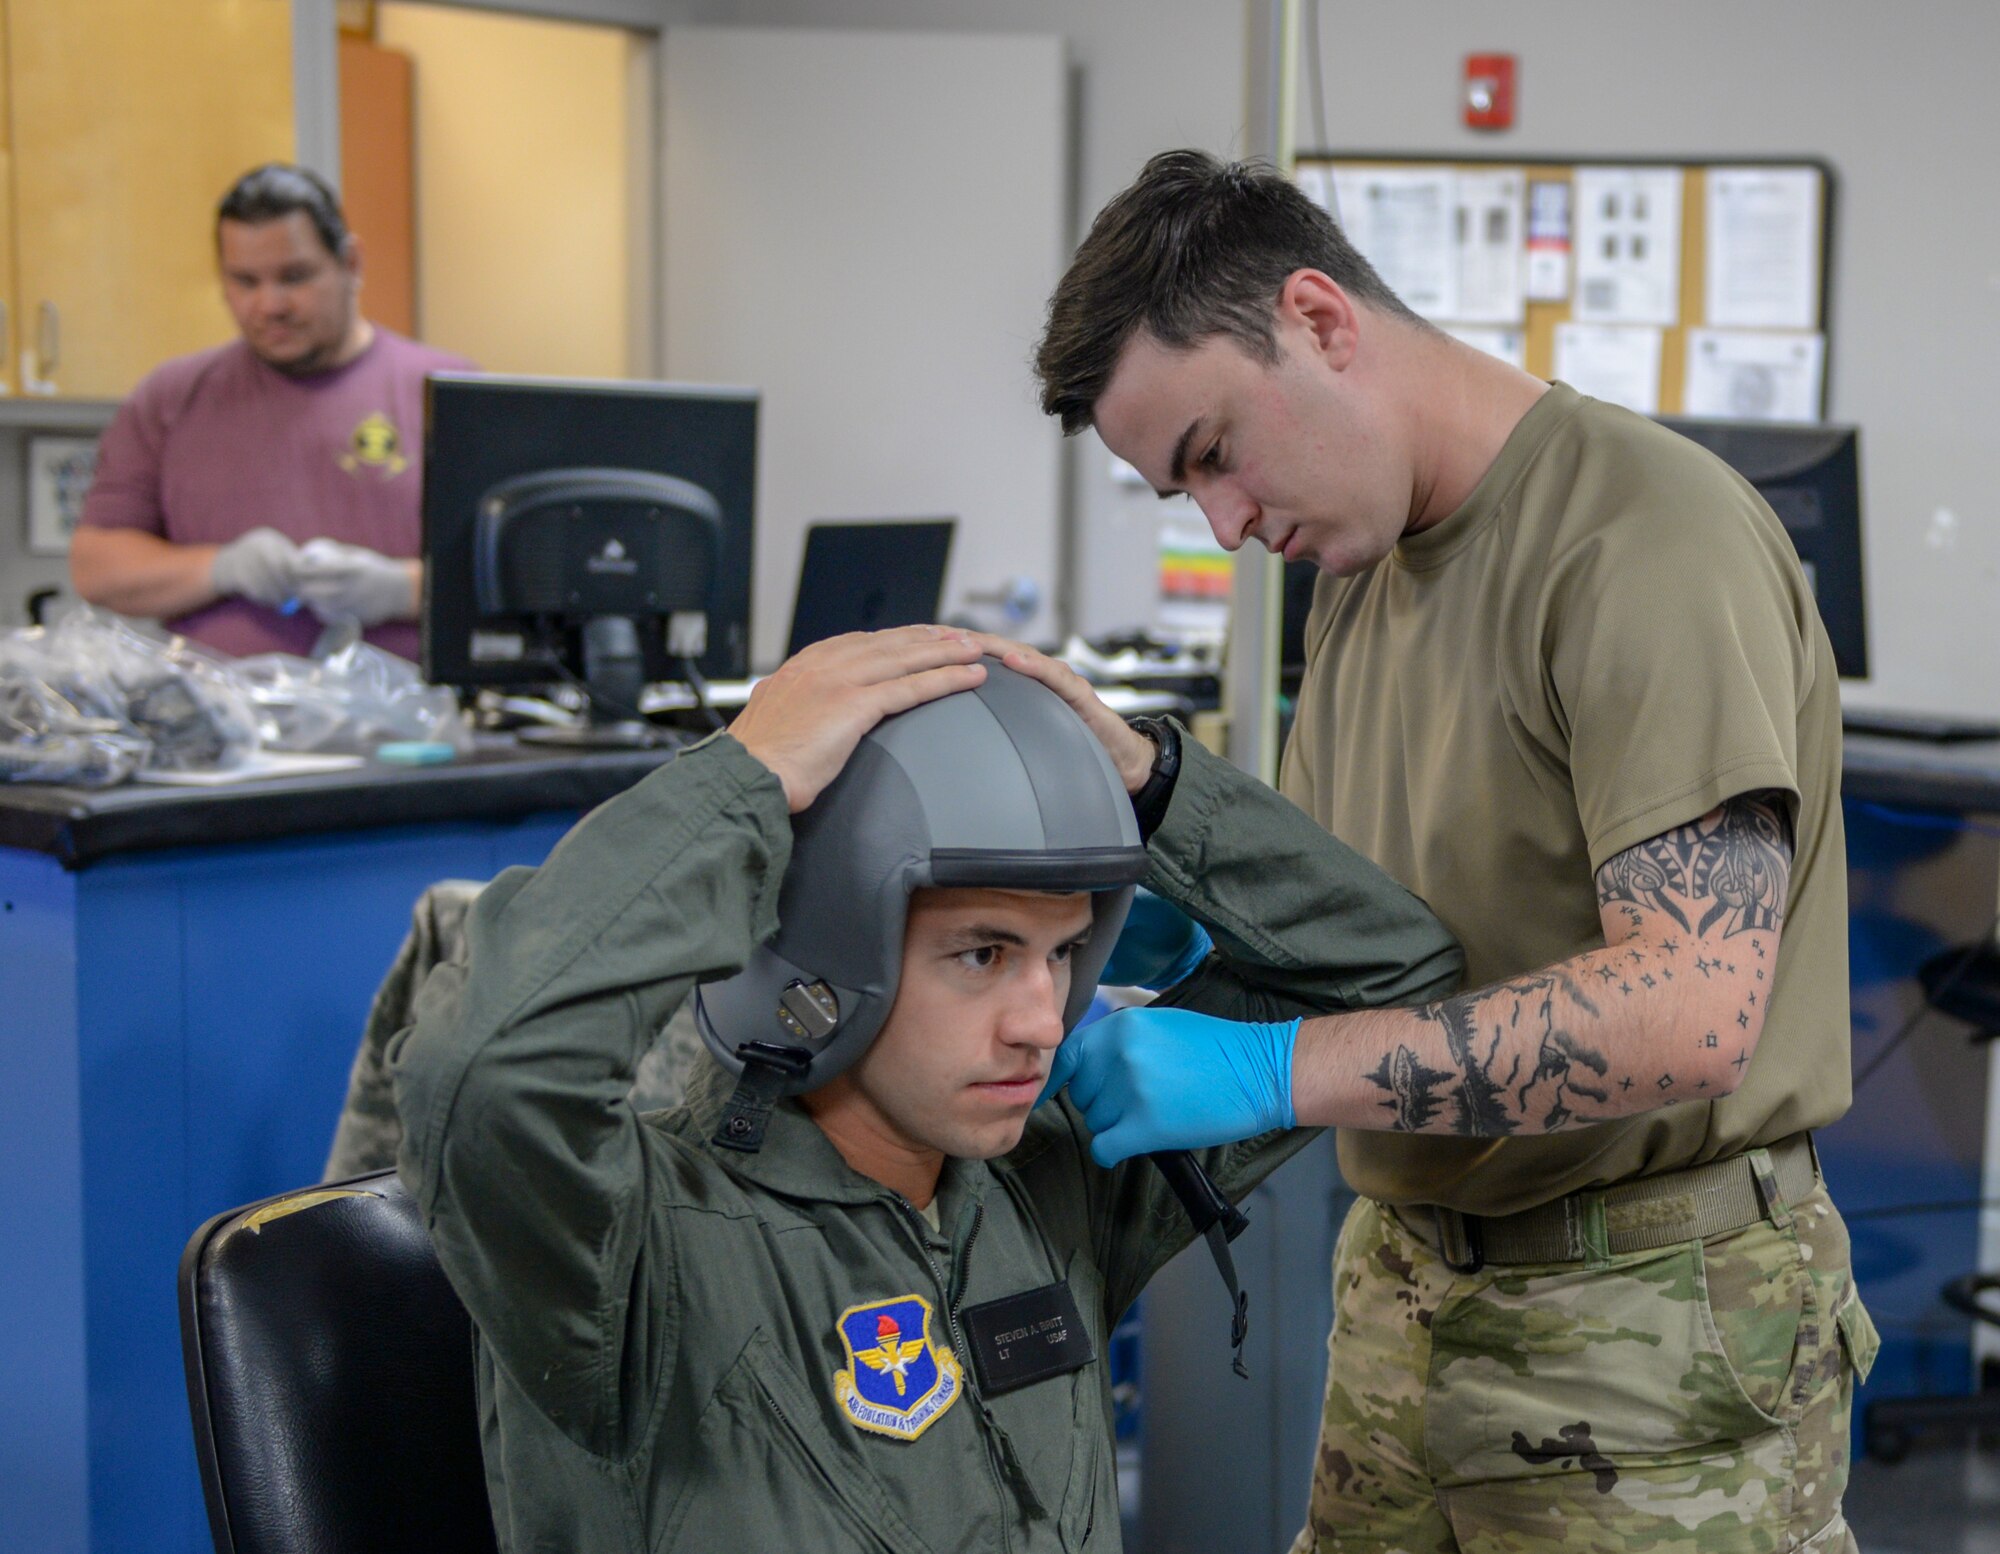 Second Lt. Steven Britt, 37th Flying Training Squadron student pilot, holds down a helmet, while Senior Airman Dillon Arizta, 37th FTS Aircrew Flight Equipment specialist, attaches a chinstrap on June 10, 2020, at Columbus Air Force Base, Miss. While in phase two of Specialized Undergraduate Pilot Training at the 37th FTS, student pilots will train in the T-6A Texan II.   (U.S. Air Force photo by Airman 1st Class Davis Donaldson)